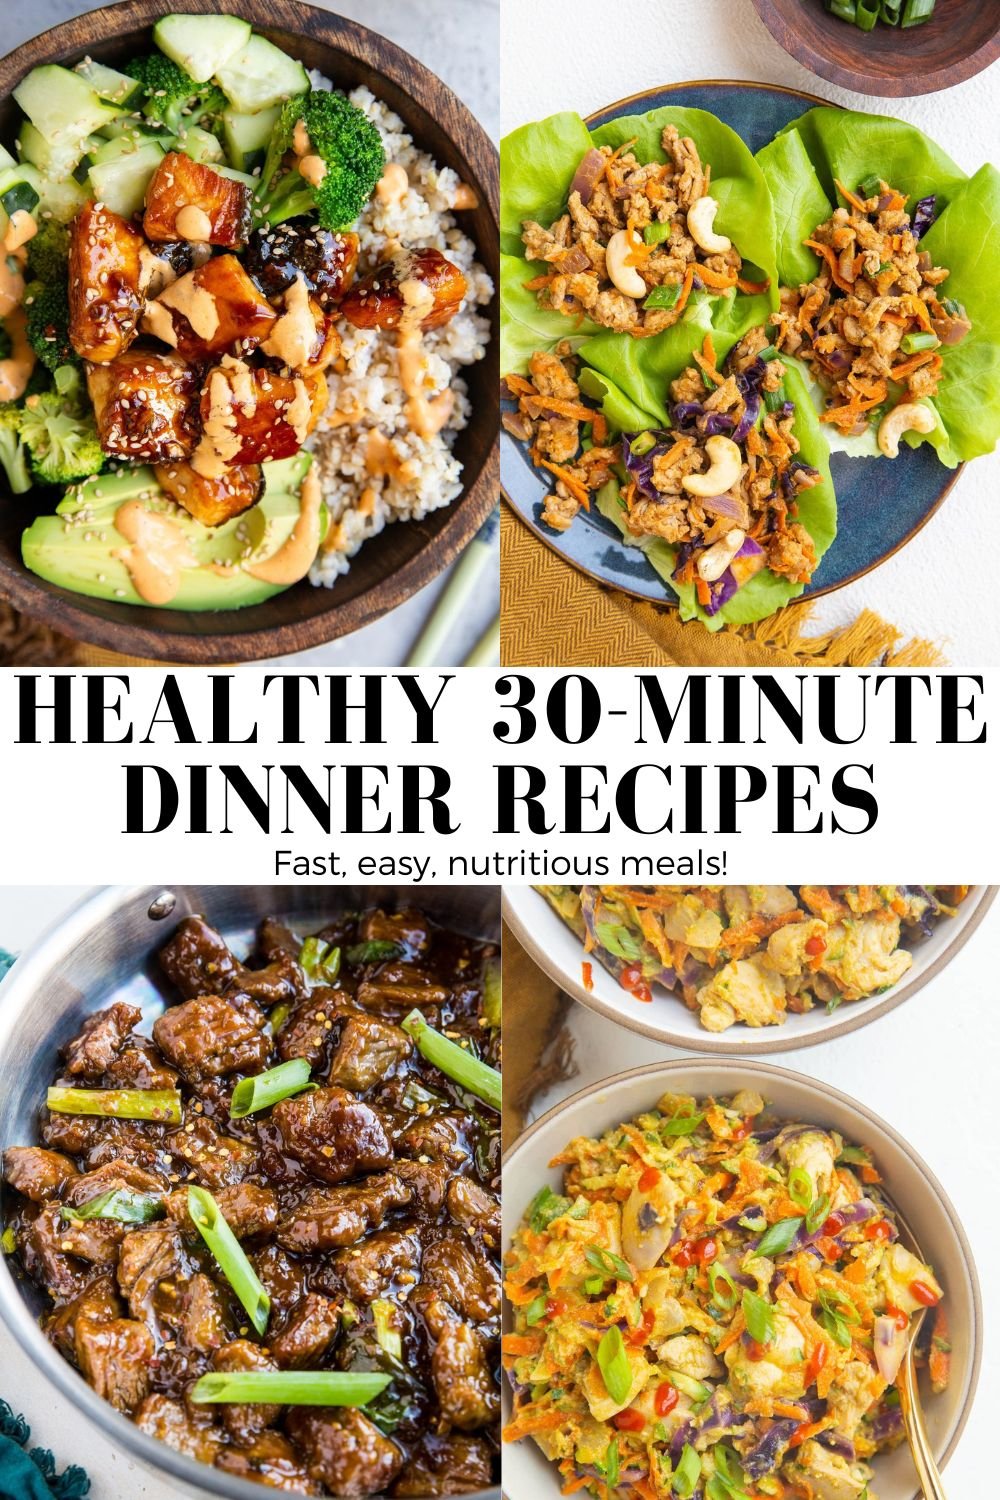 Easy fast dinner recipes roundup. Over 30 recipes that are quick and easy to meal prep